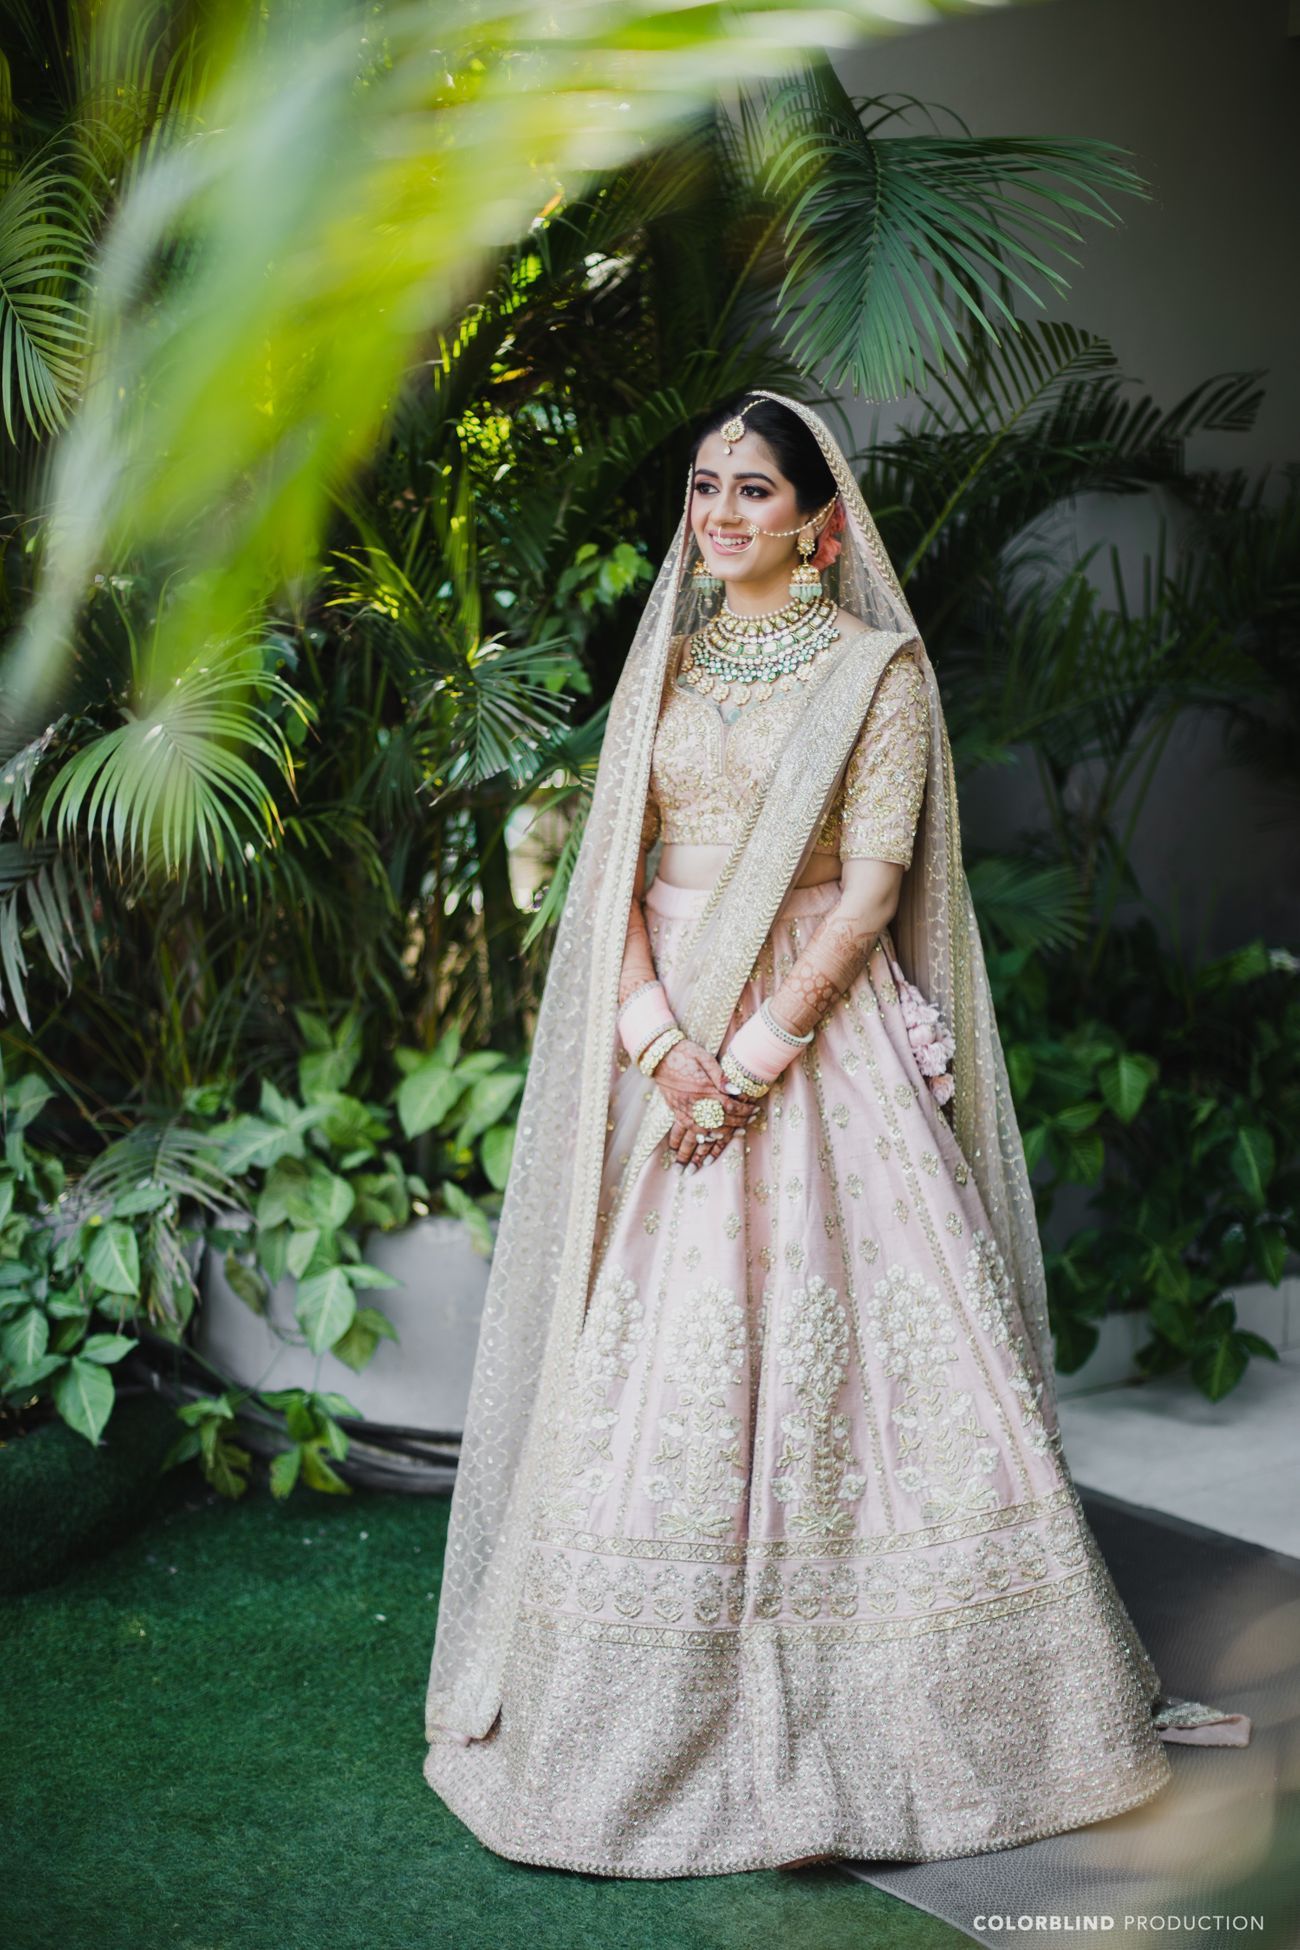 50+ Of The Most Beautiful Bridal Lehengas We Spotted On Real Brides ...